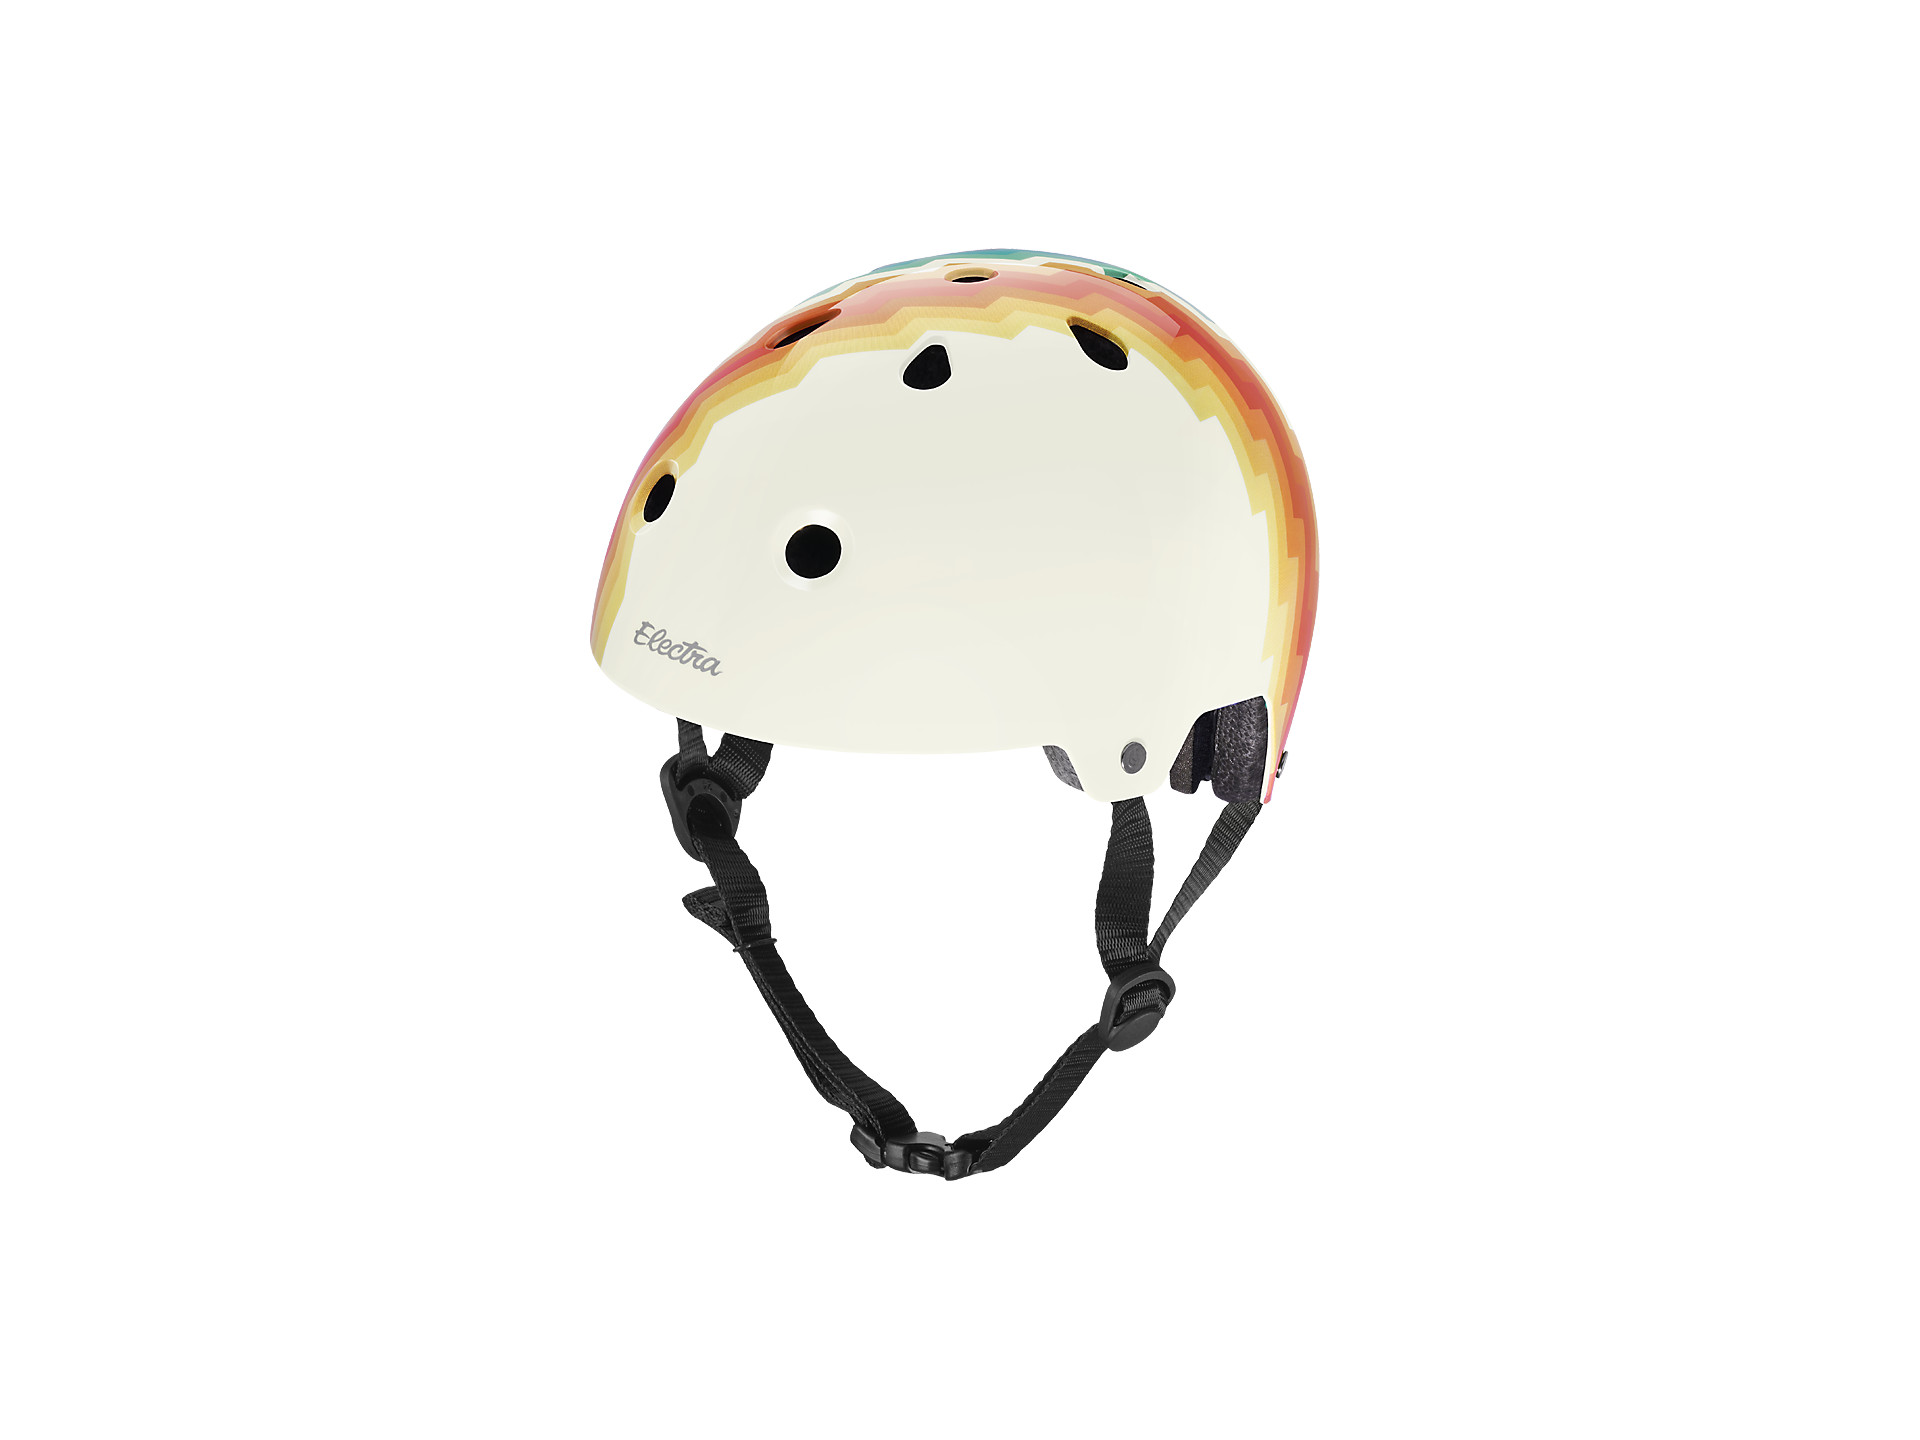 Electra Bicycle Helmet Cream Checkered ABS Hardshell CPSC Certified For Charity! 